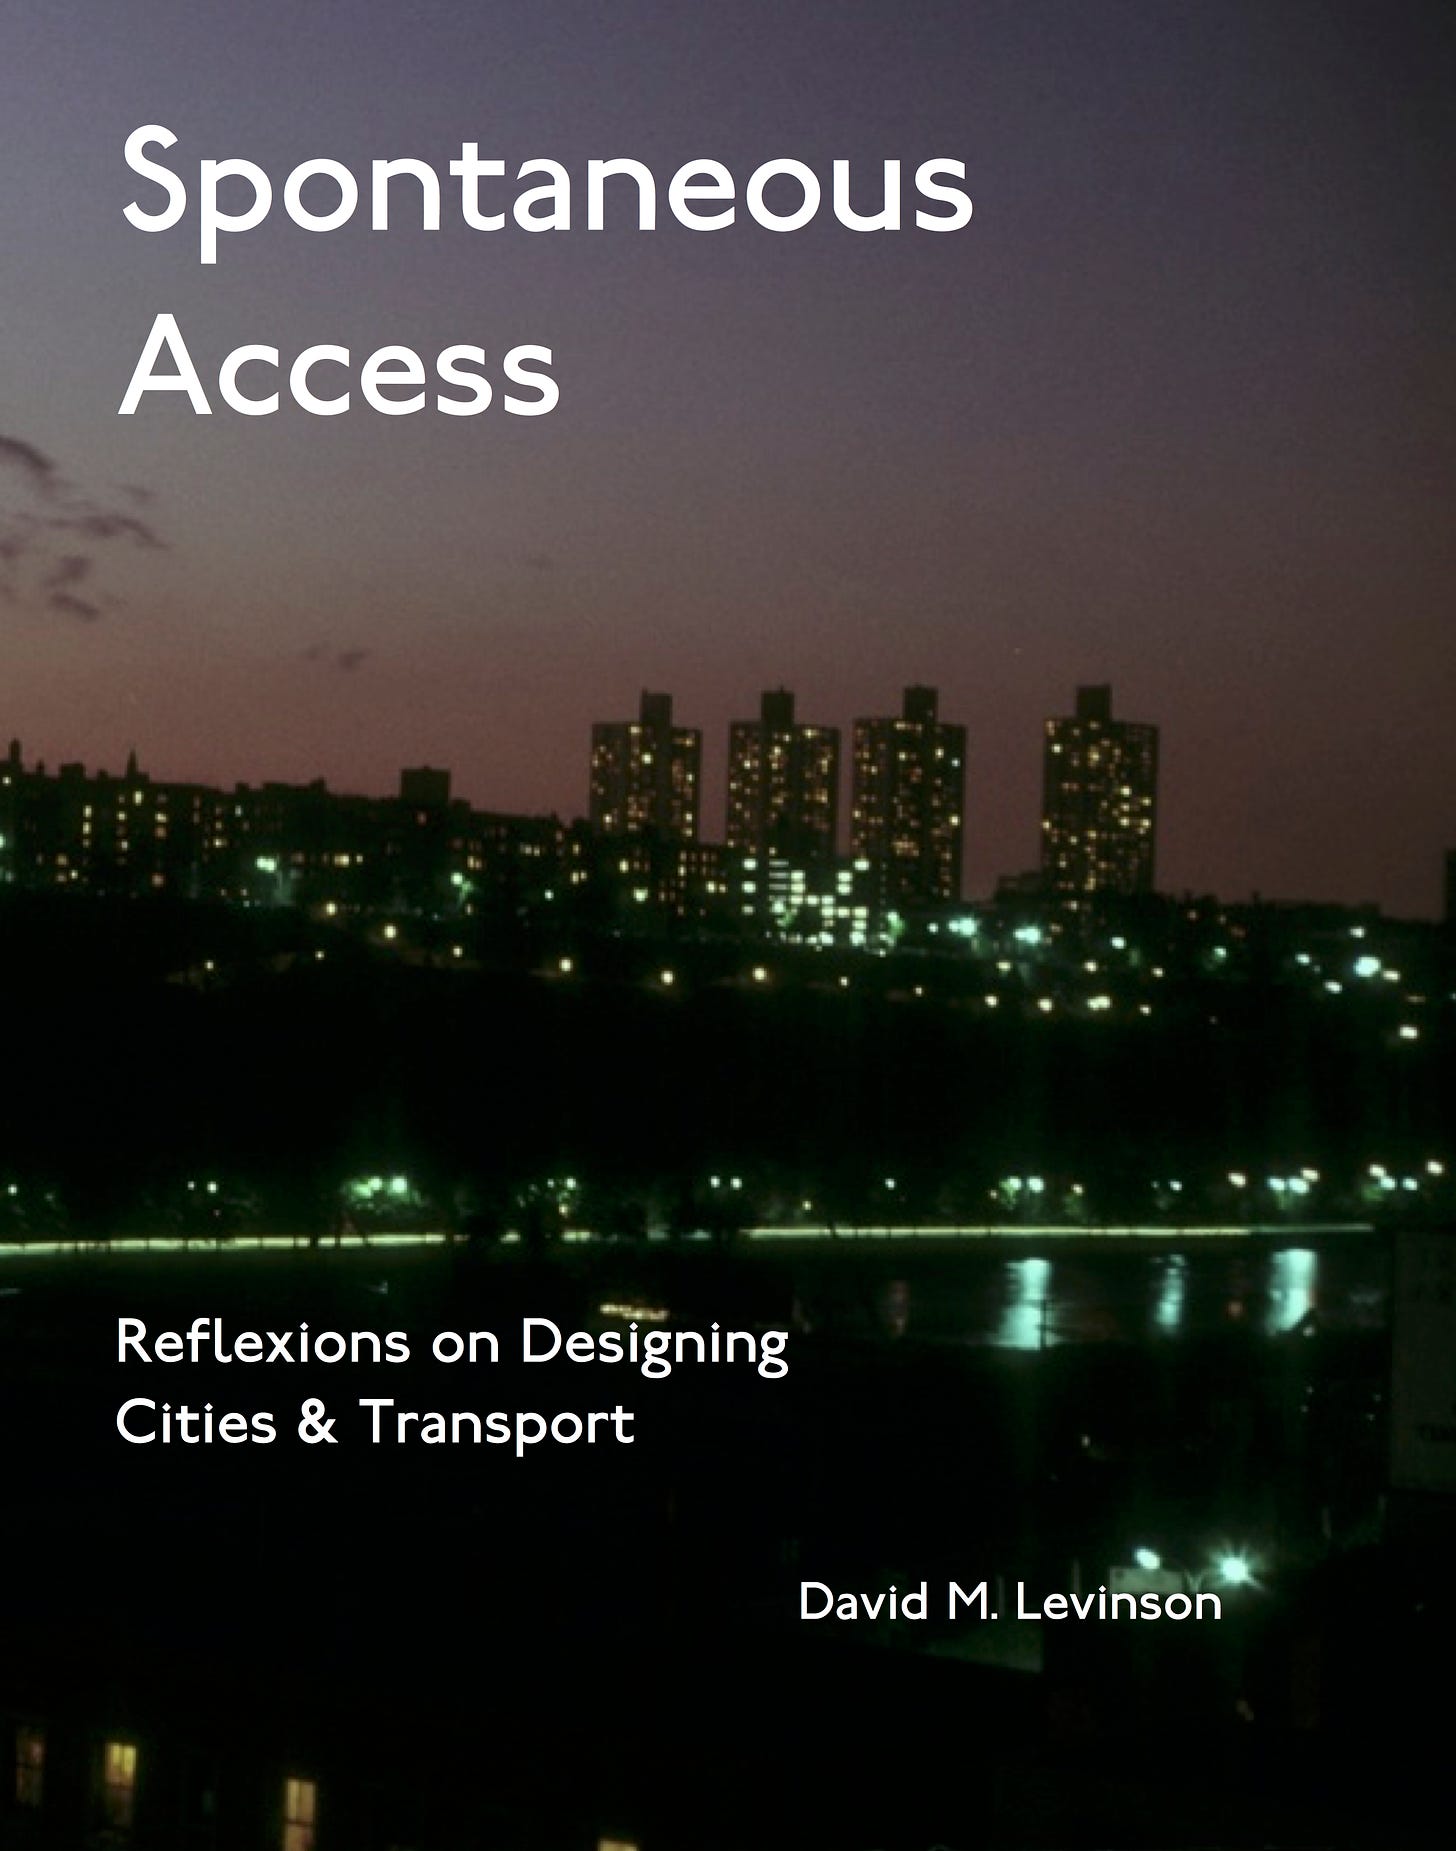 SPONTANEOUS ACCESS: REFLEXIONS ON DESIGNING CITIES AND TRANSPORT by David Levinson